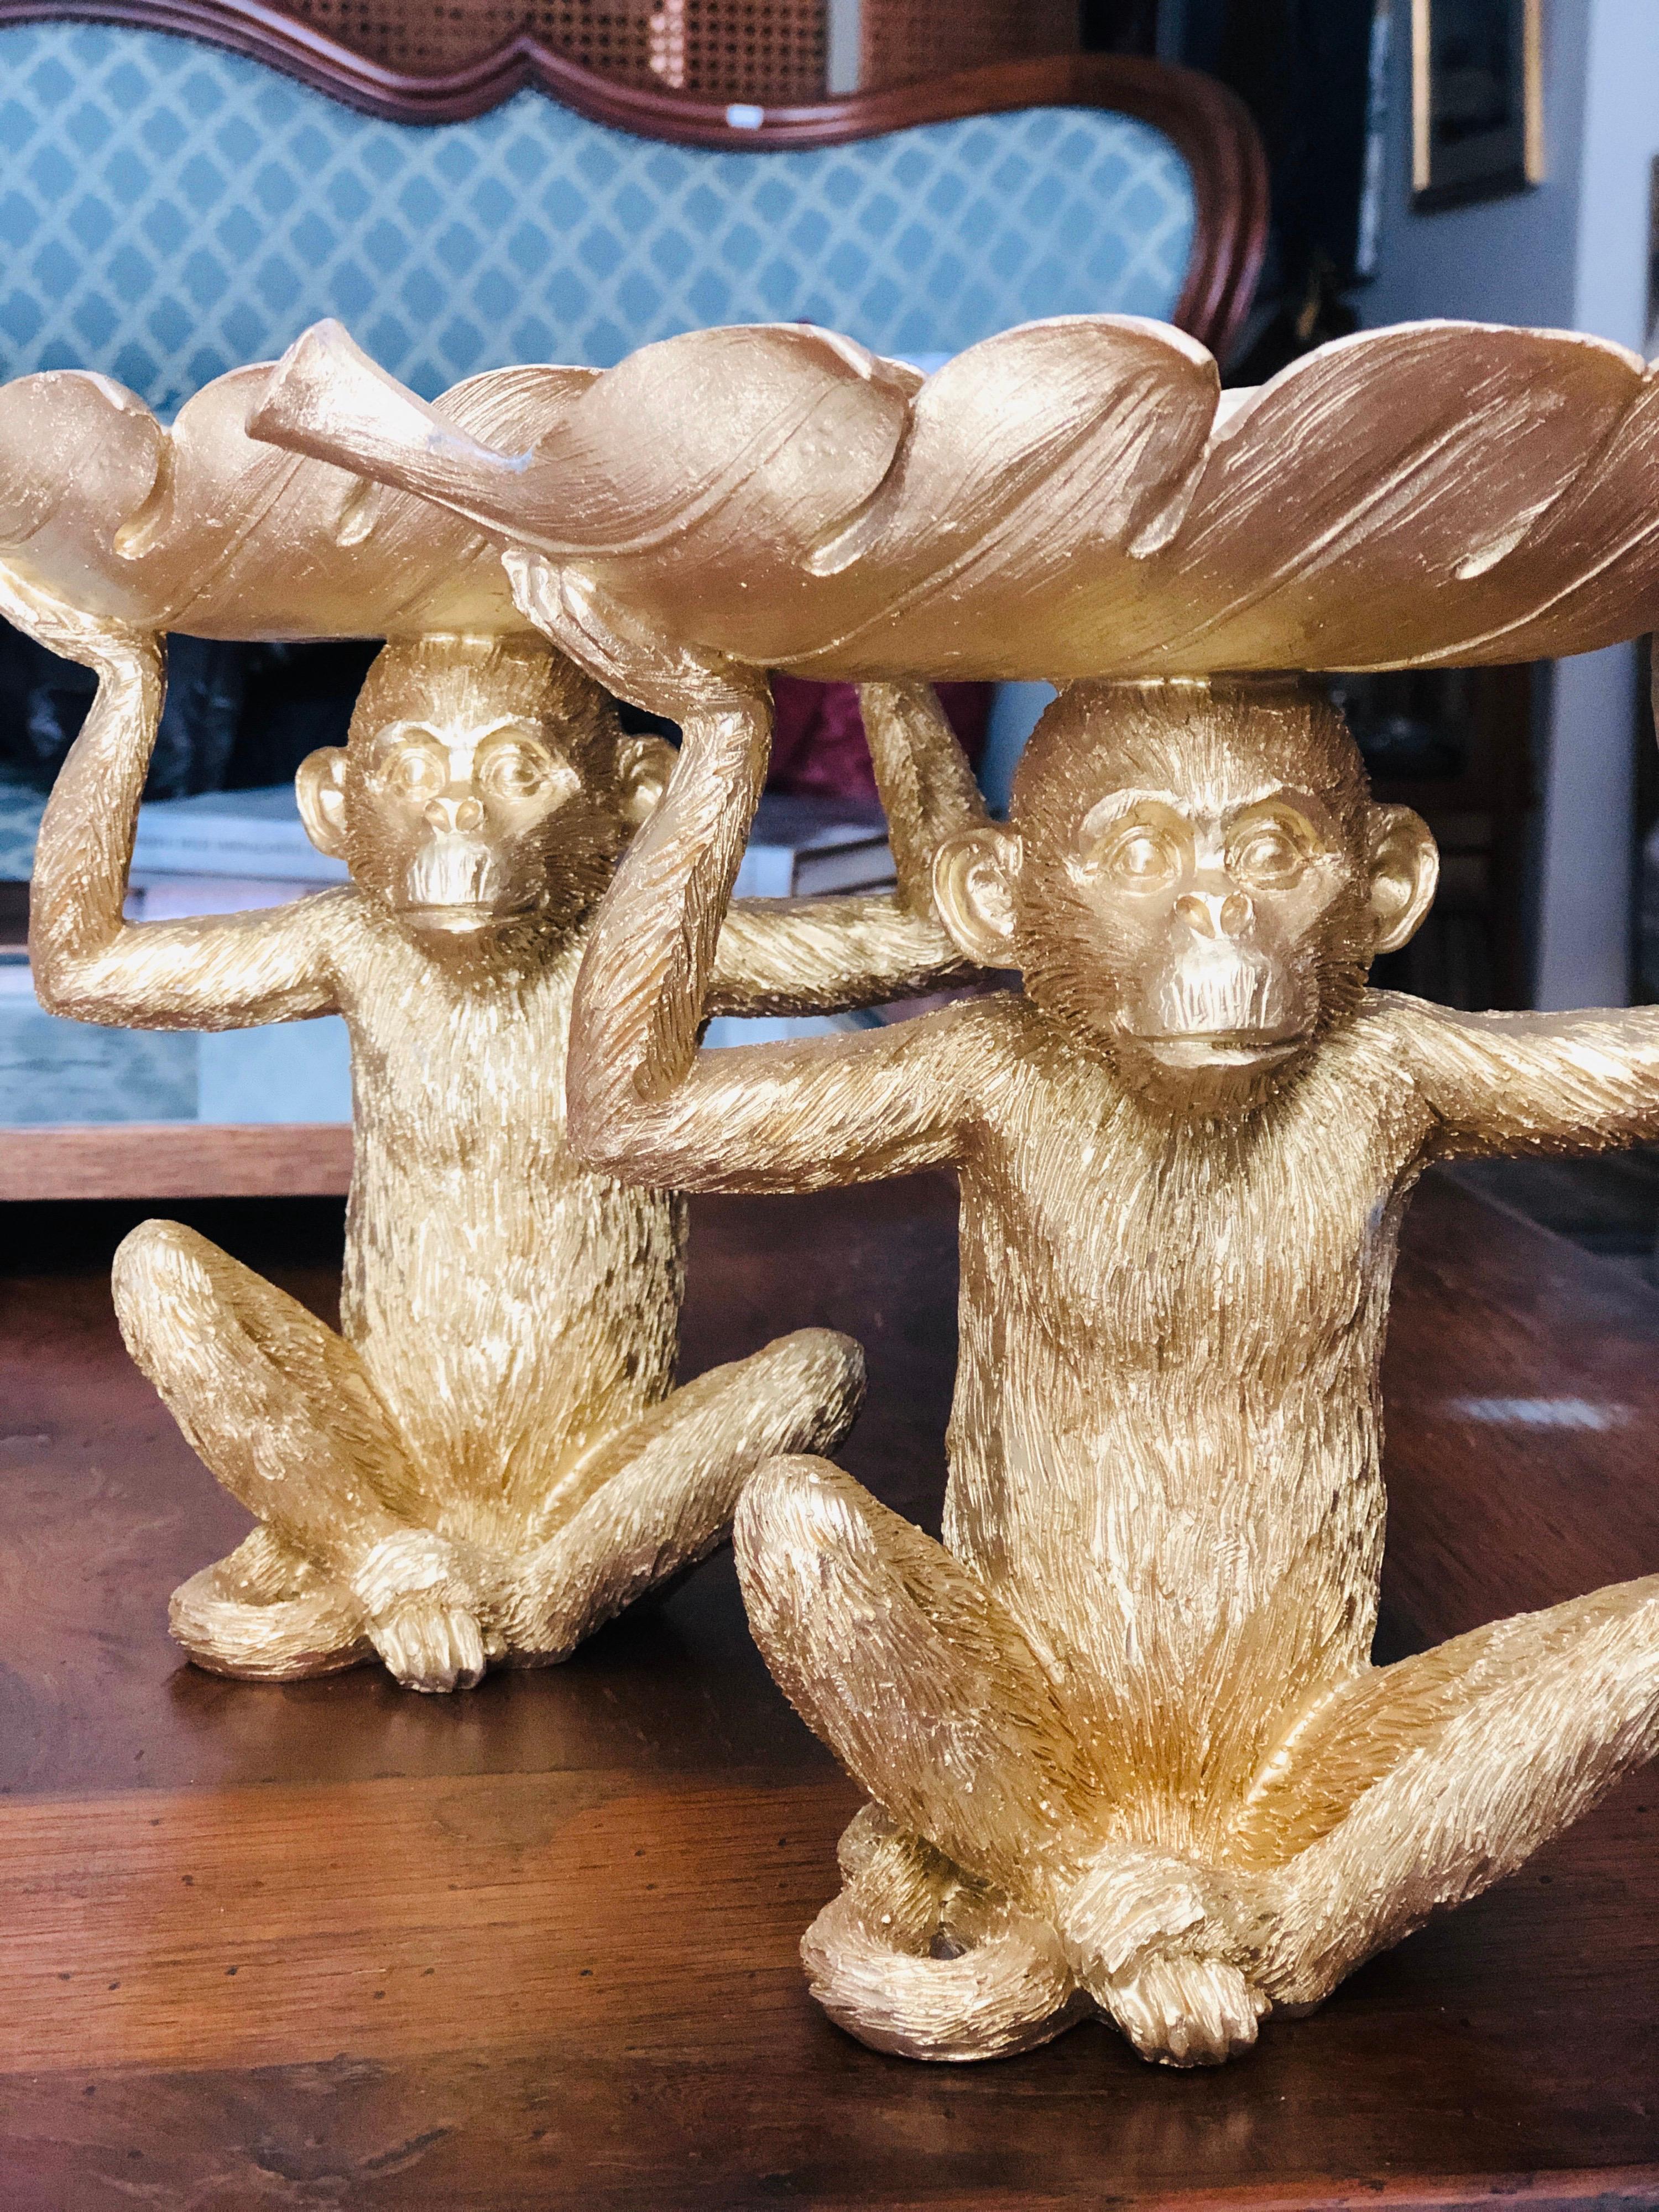 Pair of symmetrical monkeys holding leaves in their arms made of plaster hand painted with gold finish.
Nice and elegant accessories for a desk or a table.
You may place any kind of small items or delicious chocolates on them.
France, circa